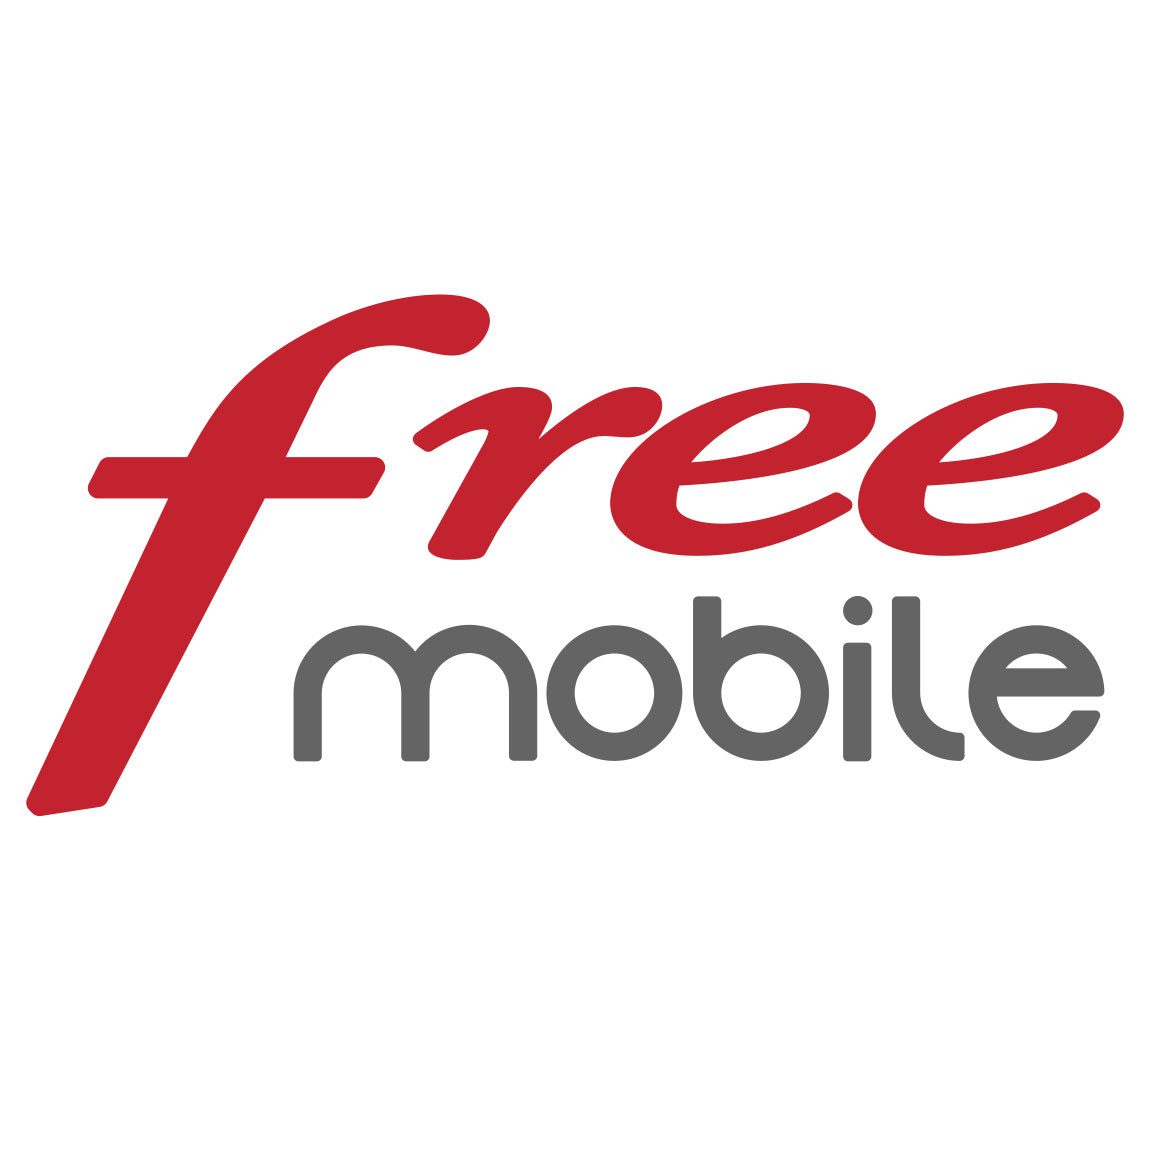 UFC-Que Choisir lanserar Action Against Free and its Cost of Mobile Return